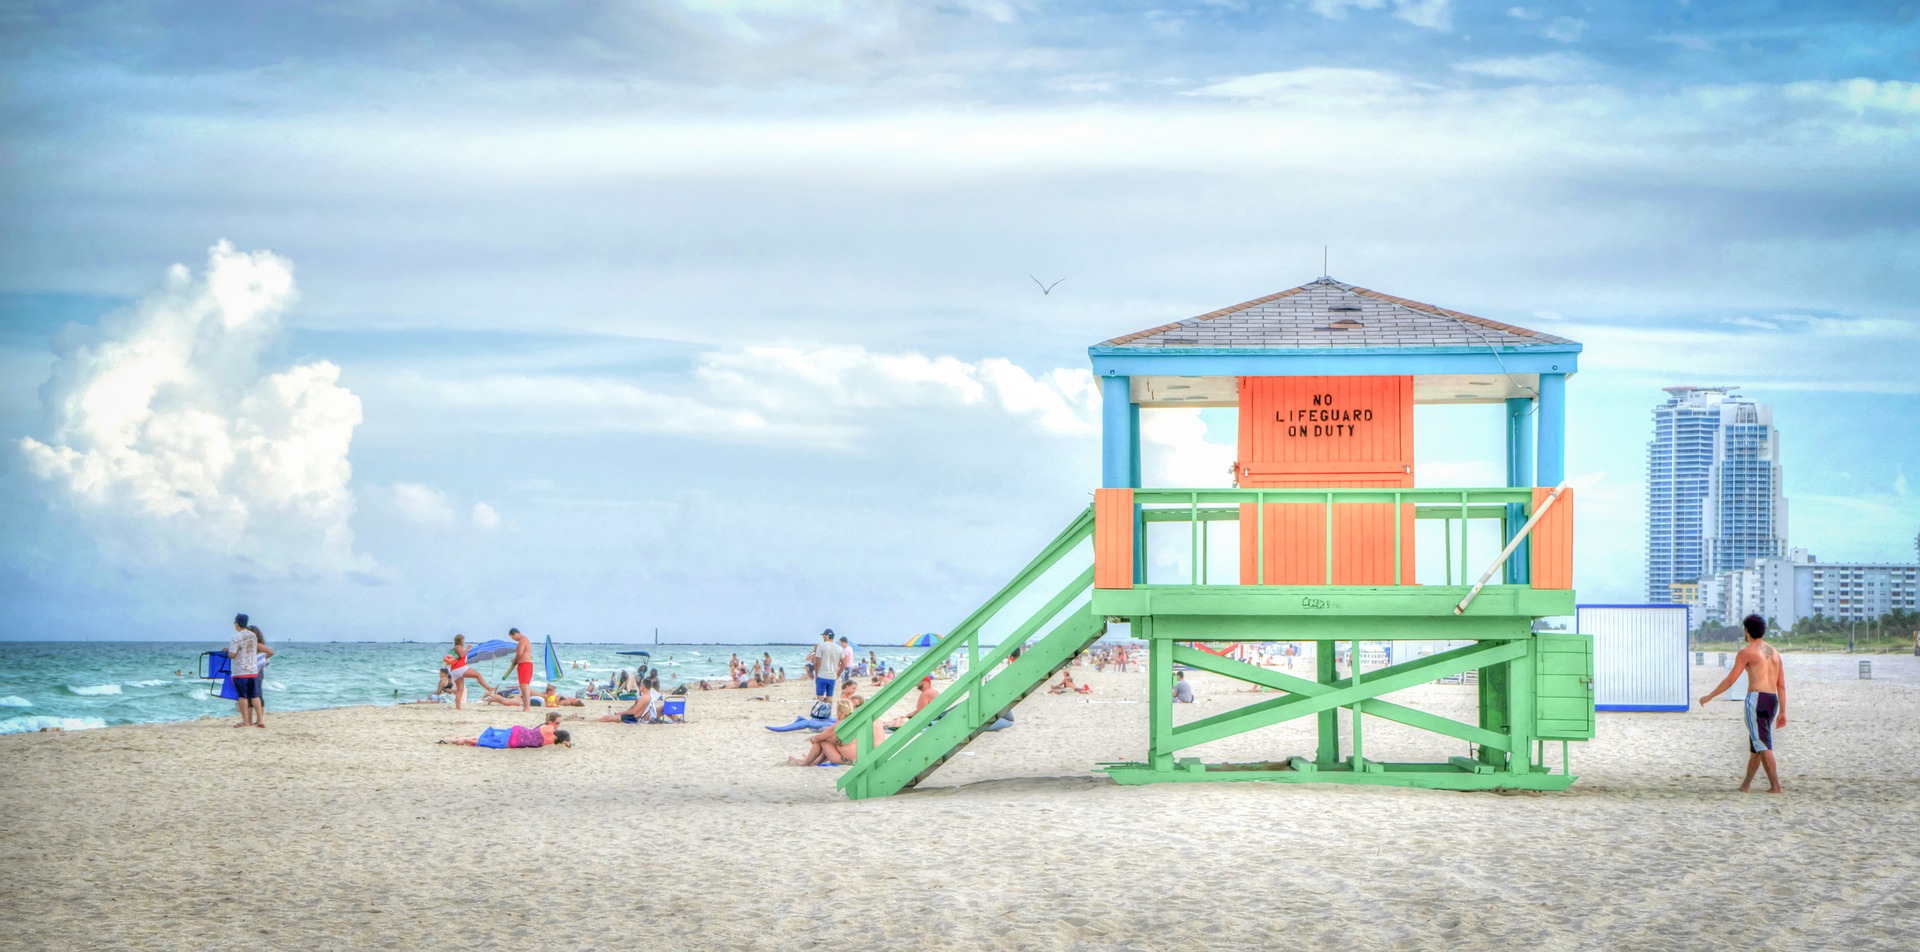 Summer is in session and all we can think about is feeling the sun on our skin and sand in our toes. As a Florida native, I can confidently say that these are the best Florida beach towns to visit.